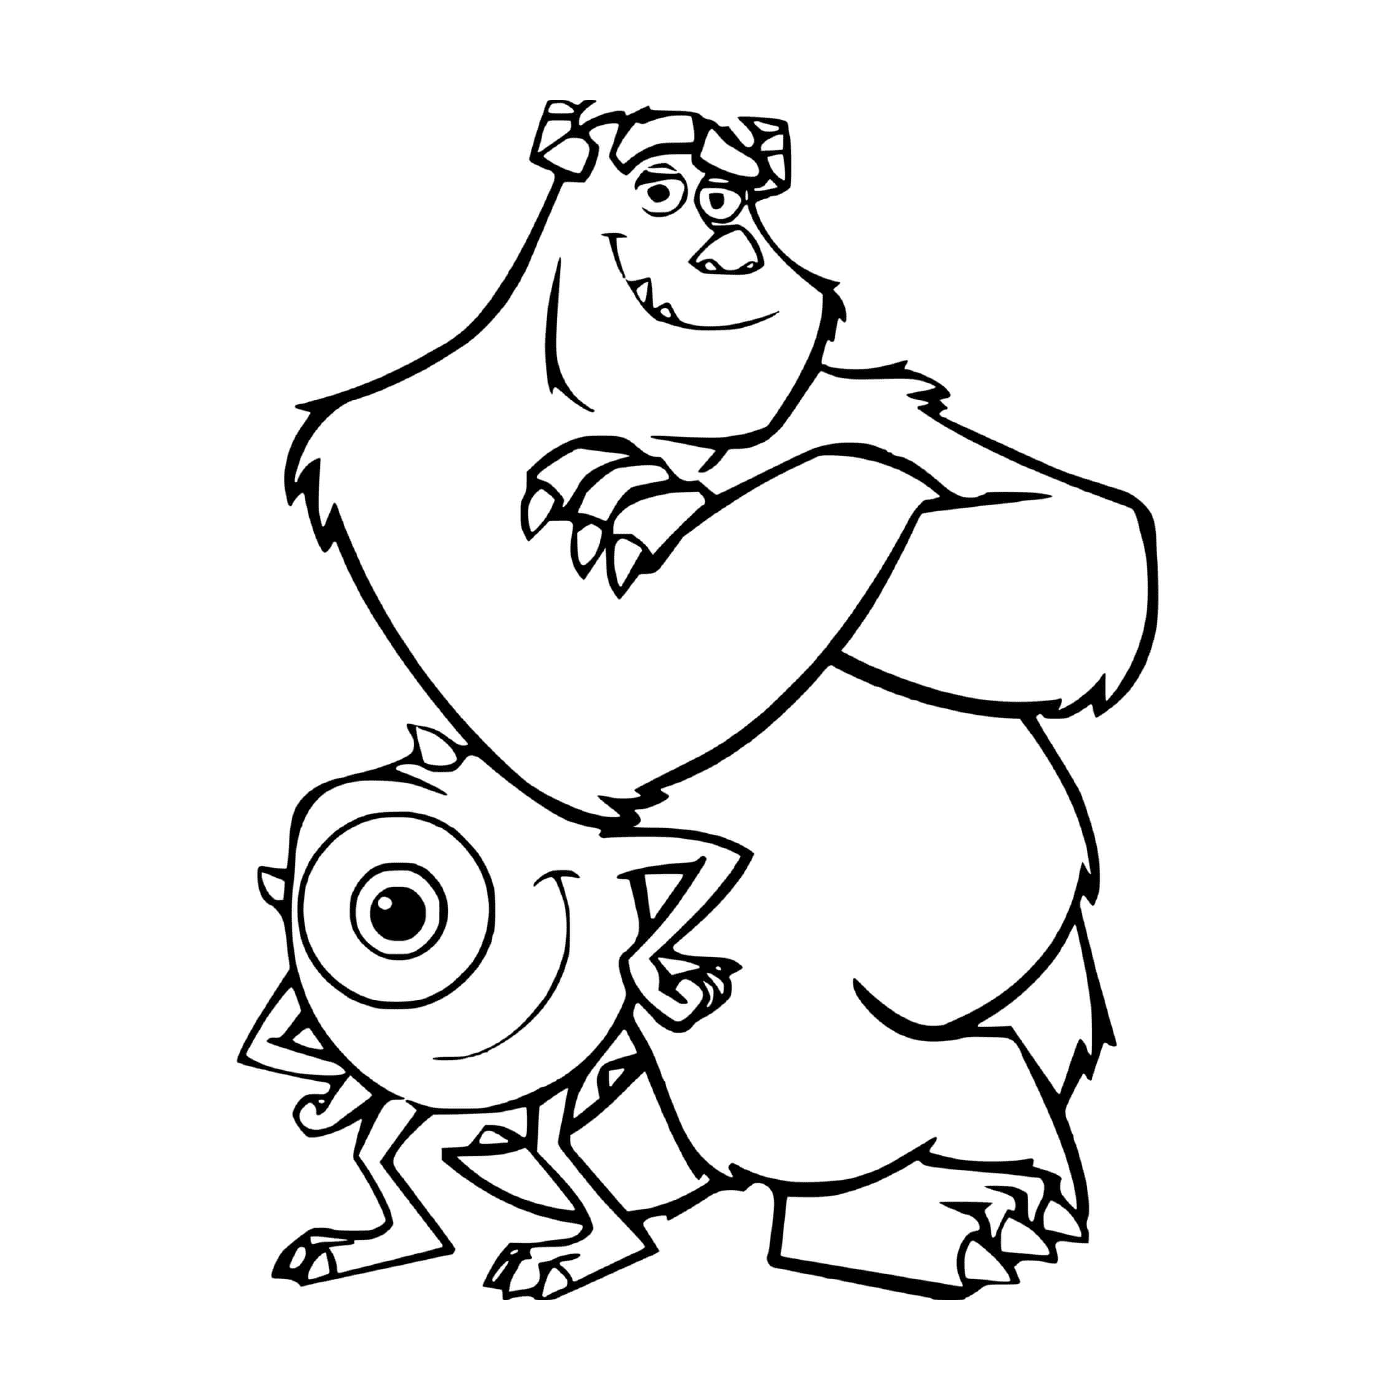  Two characters from Monsters and Cie 